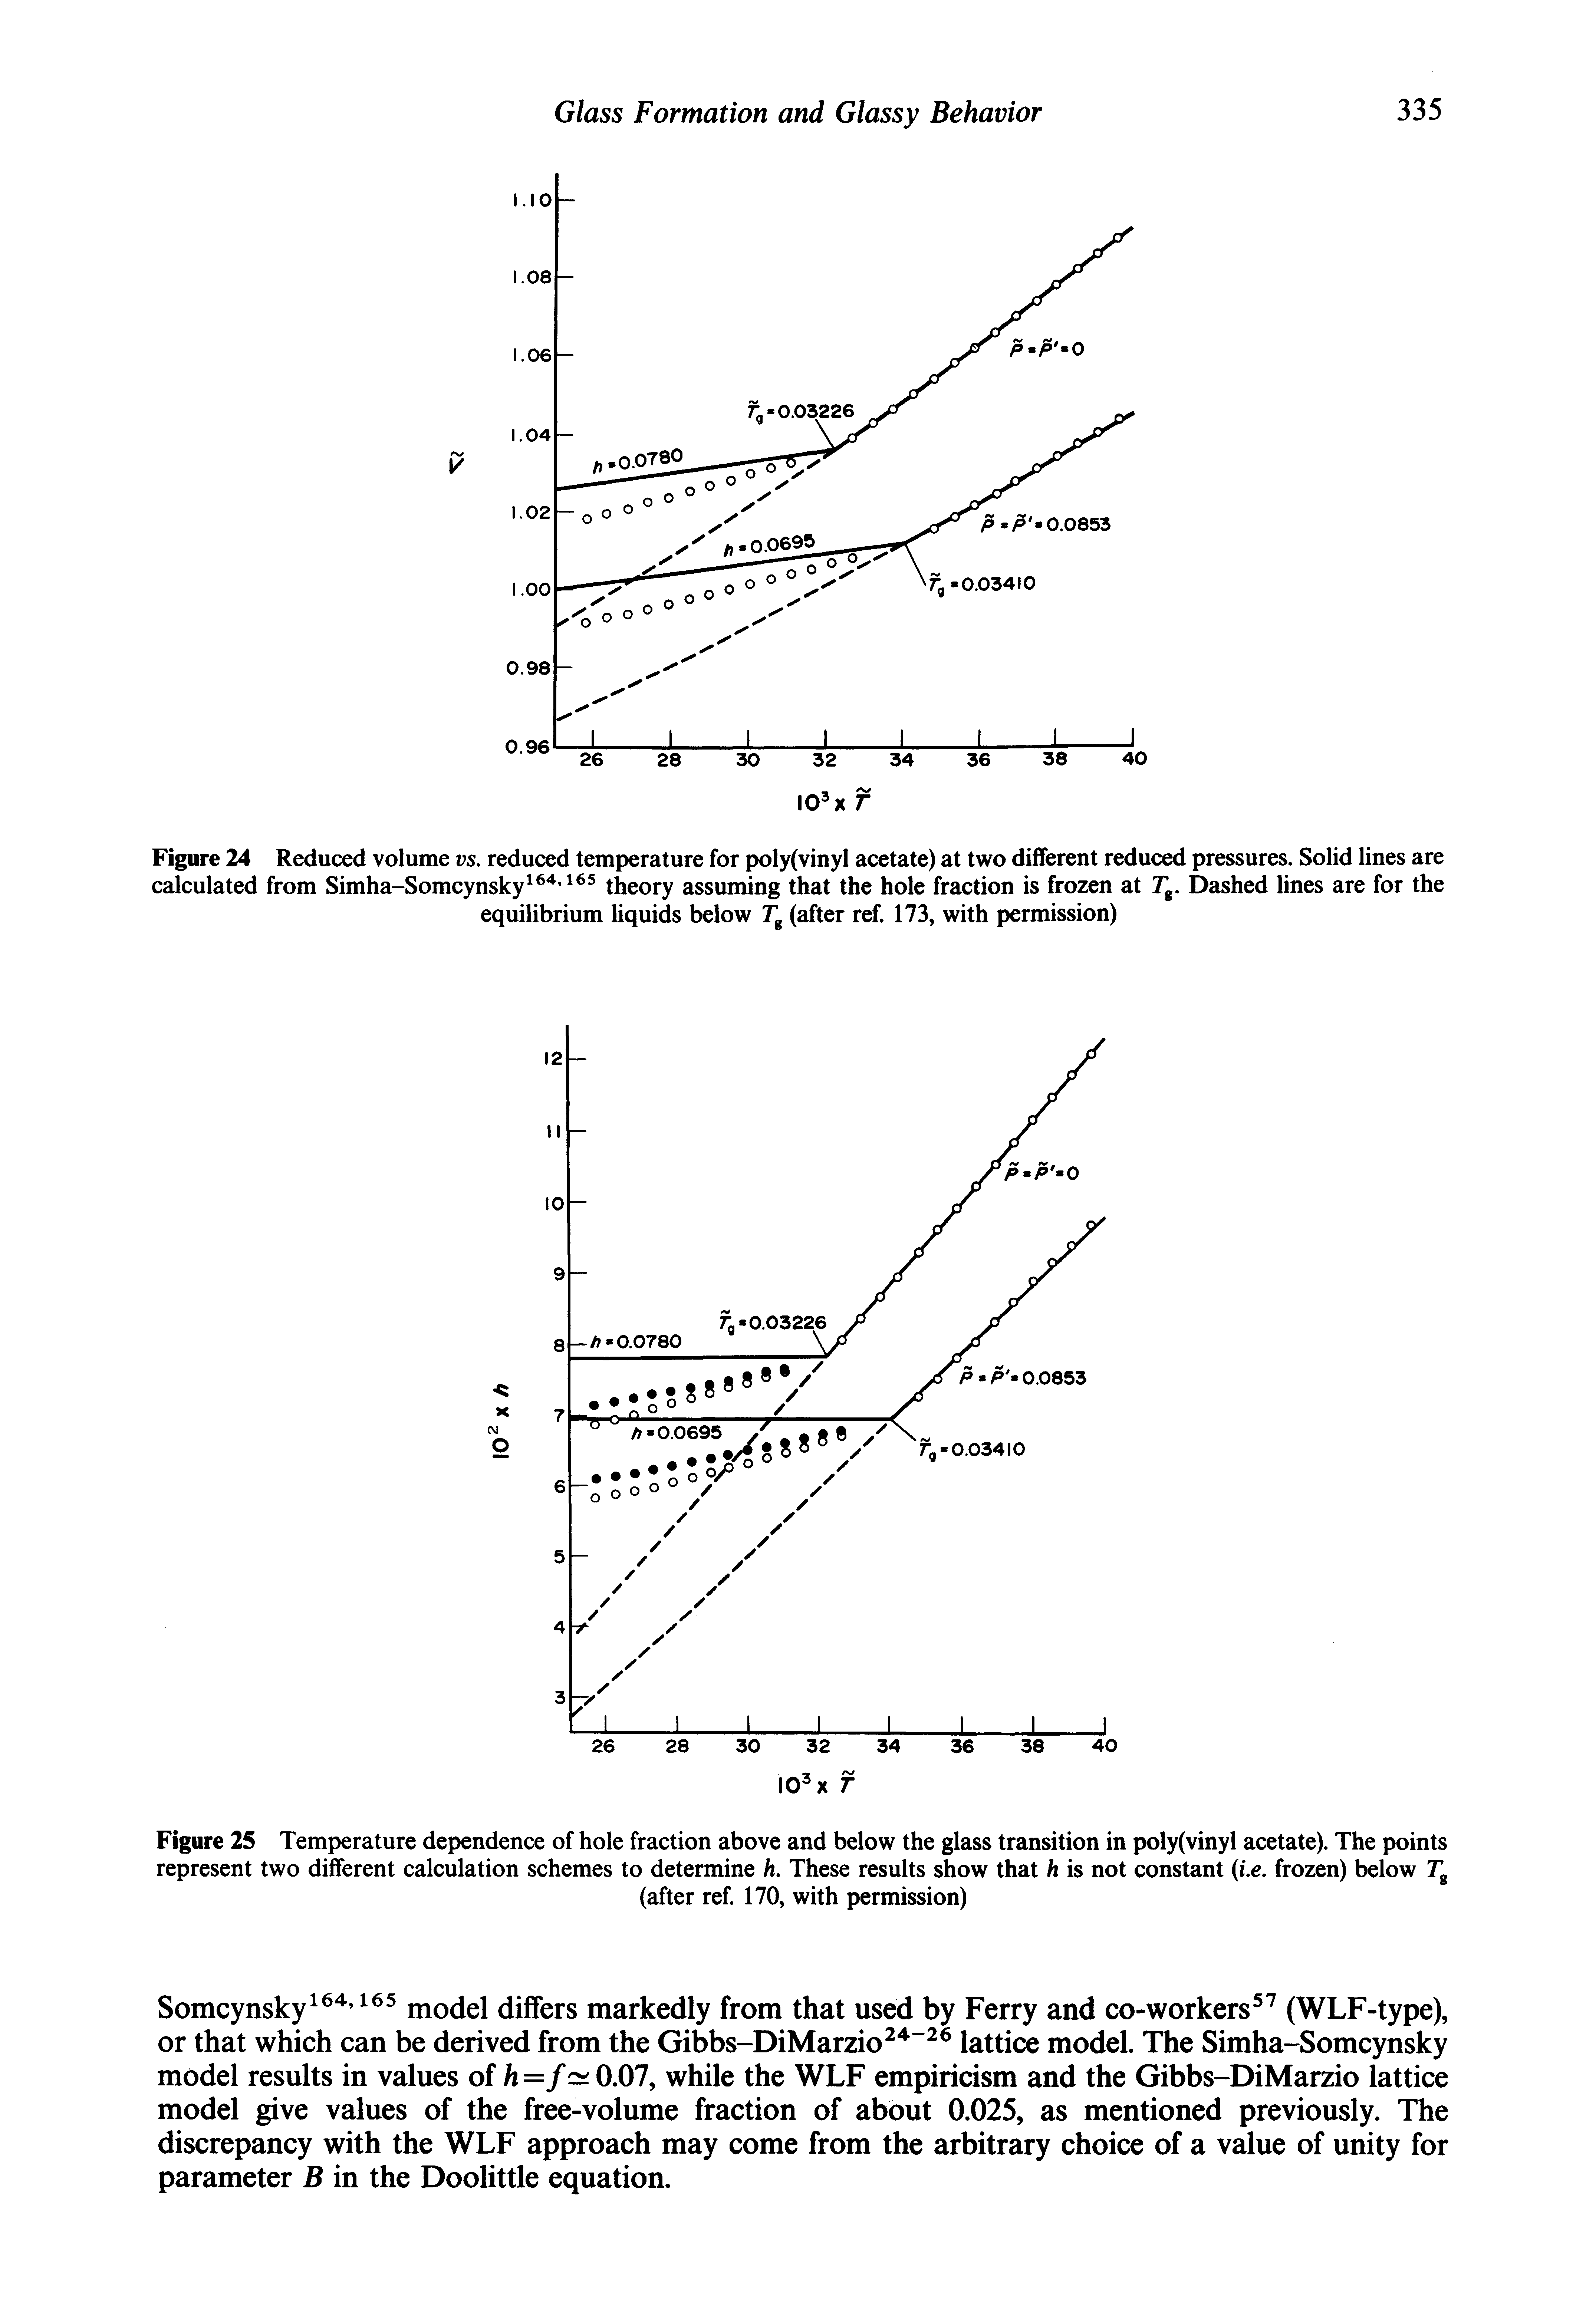 Figure 24 Reduced volume vs. reduced temperature for poly(vinyl acetate) at two different reduced pressures. Solid lines are calculated from Simha-Somcynsky theory assuming that the hole fraction is frozen at Tg. Dashed hnes are for the equilibrium liquids below Tg (after ref. 173, with permission)...